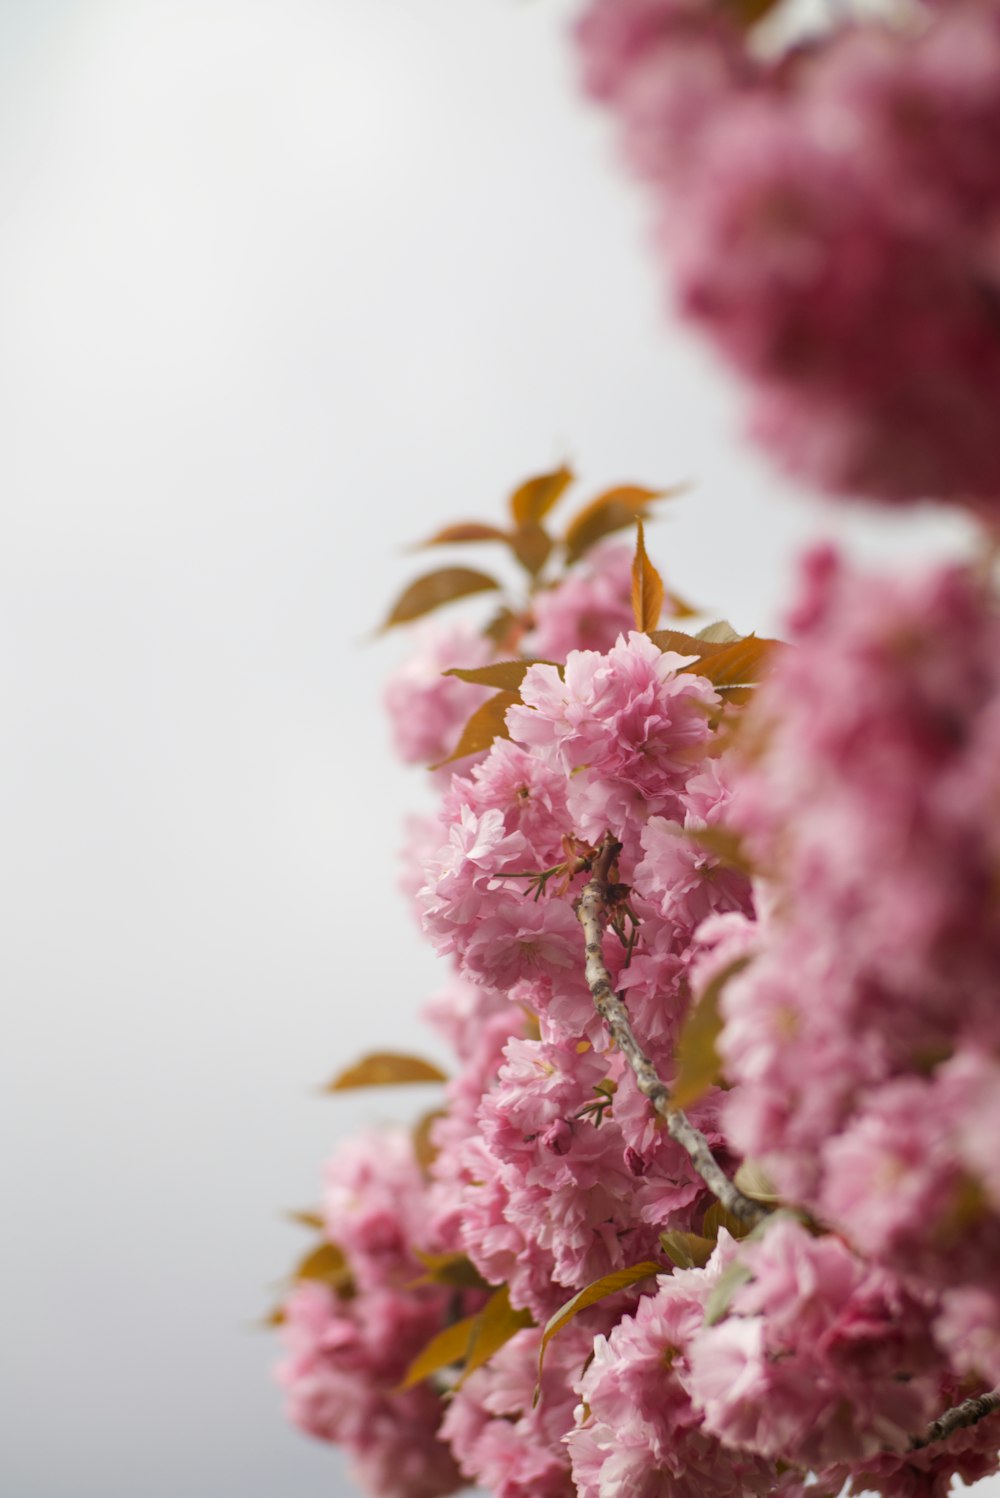 pink flowers are blooming on a tree